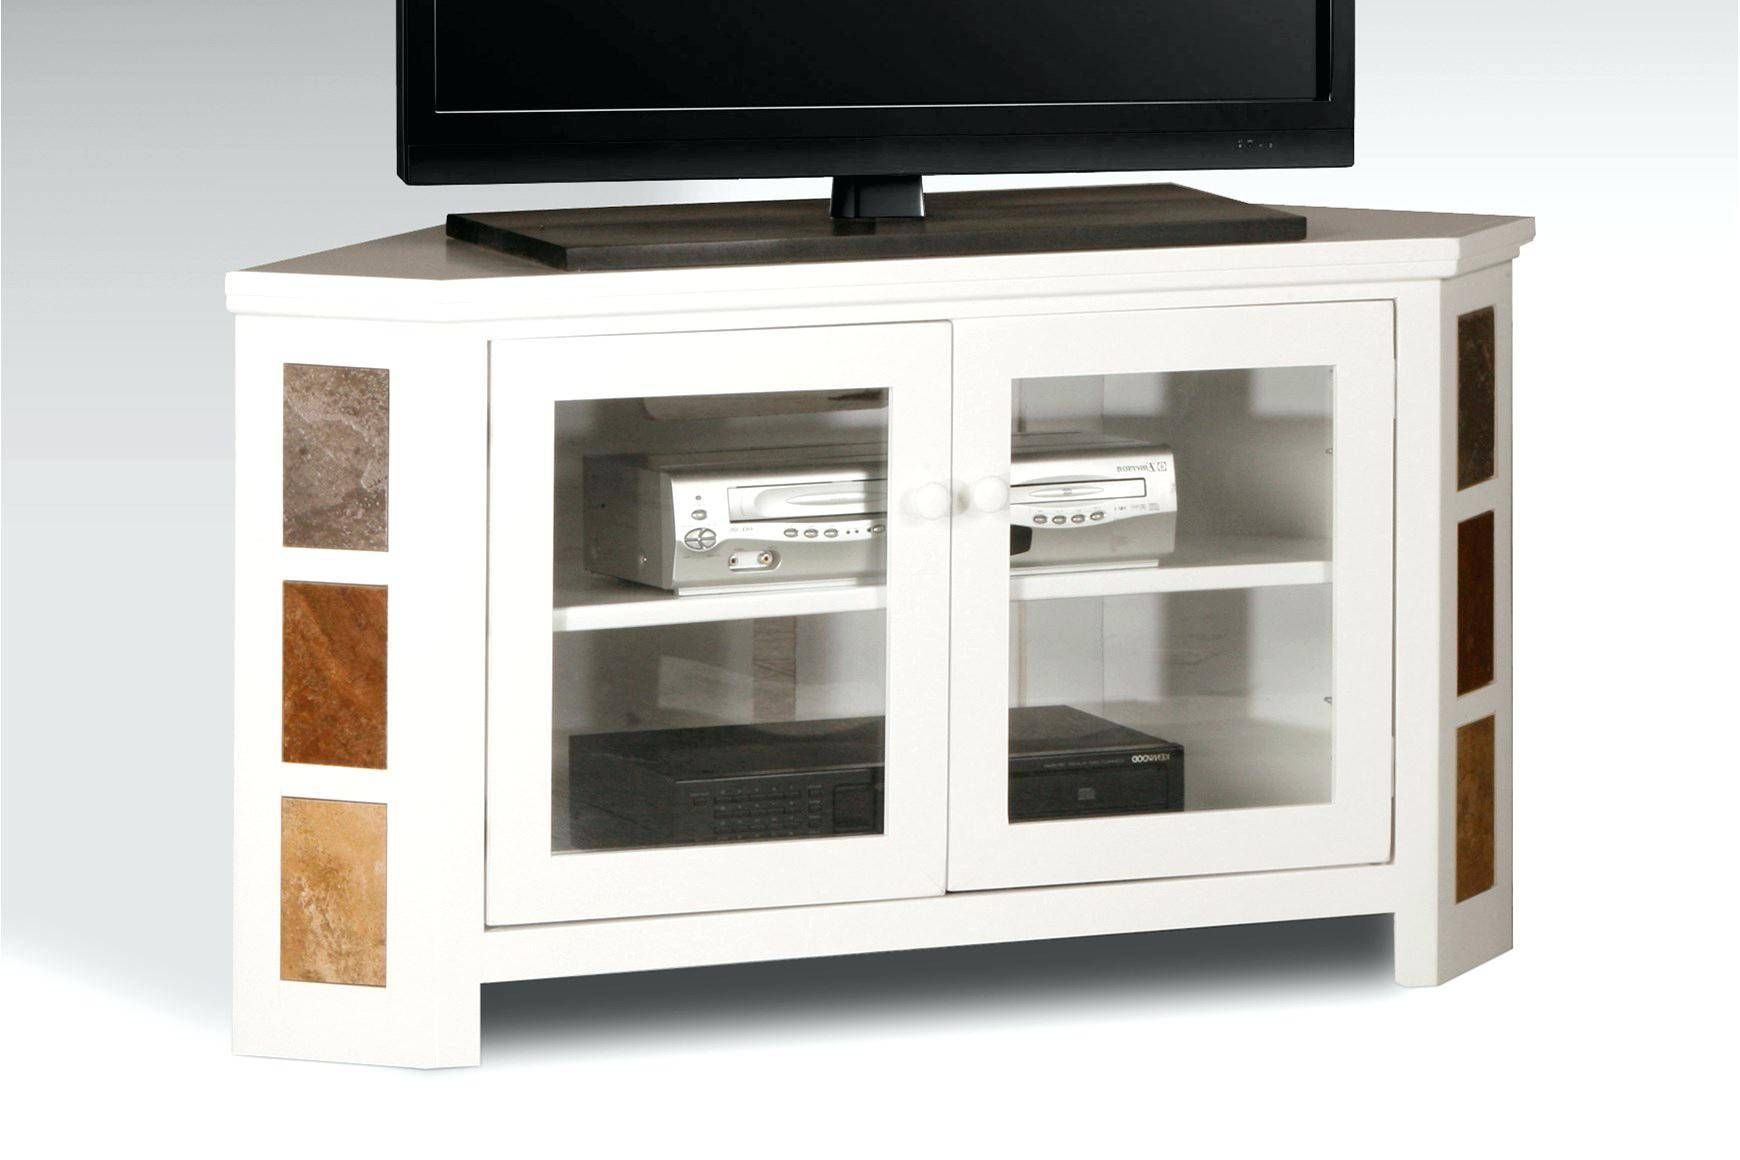 Tv Stand : Tall Corner Tv Stand For 55 Inch Tv Electric Corner Within White Small Corner Tv Stands (View 14 of 15)